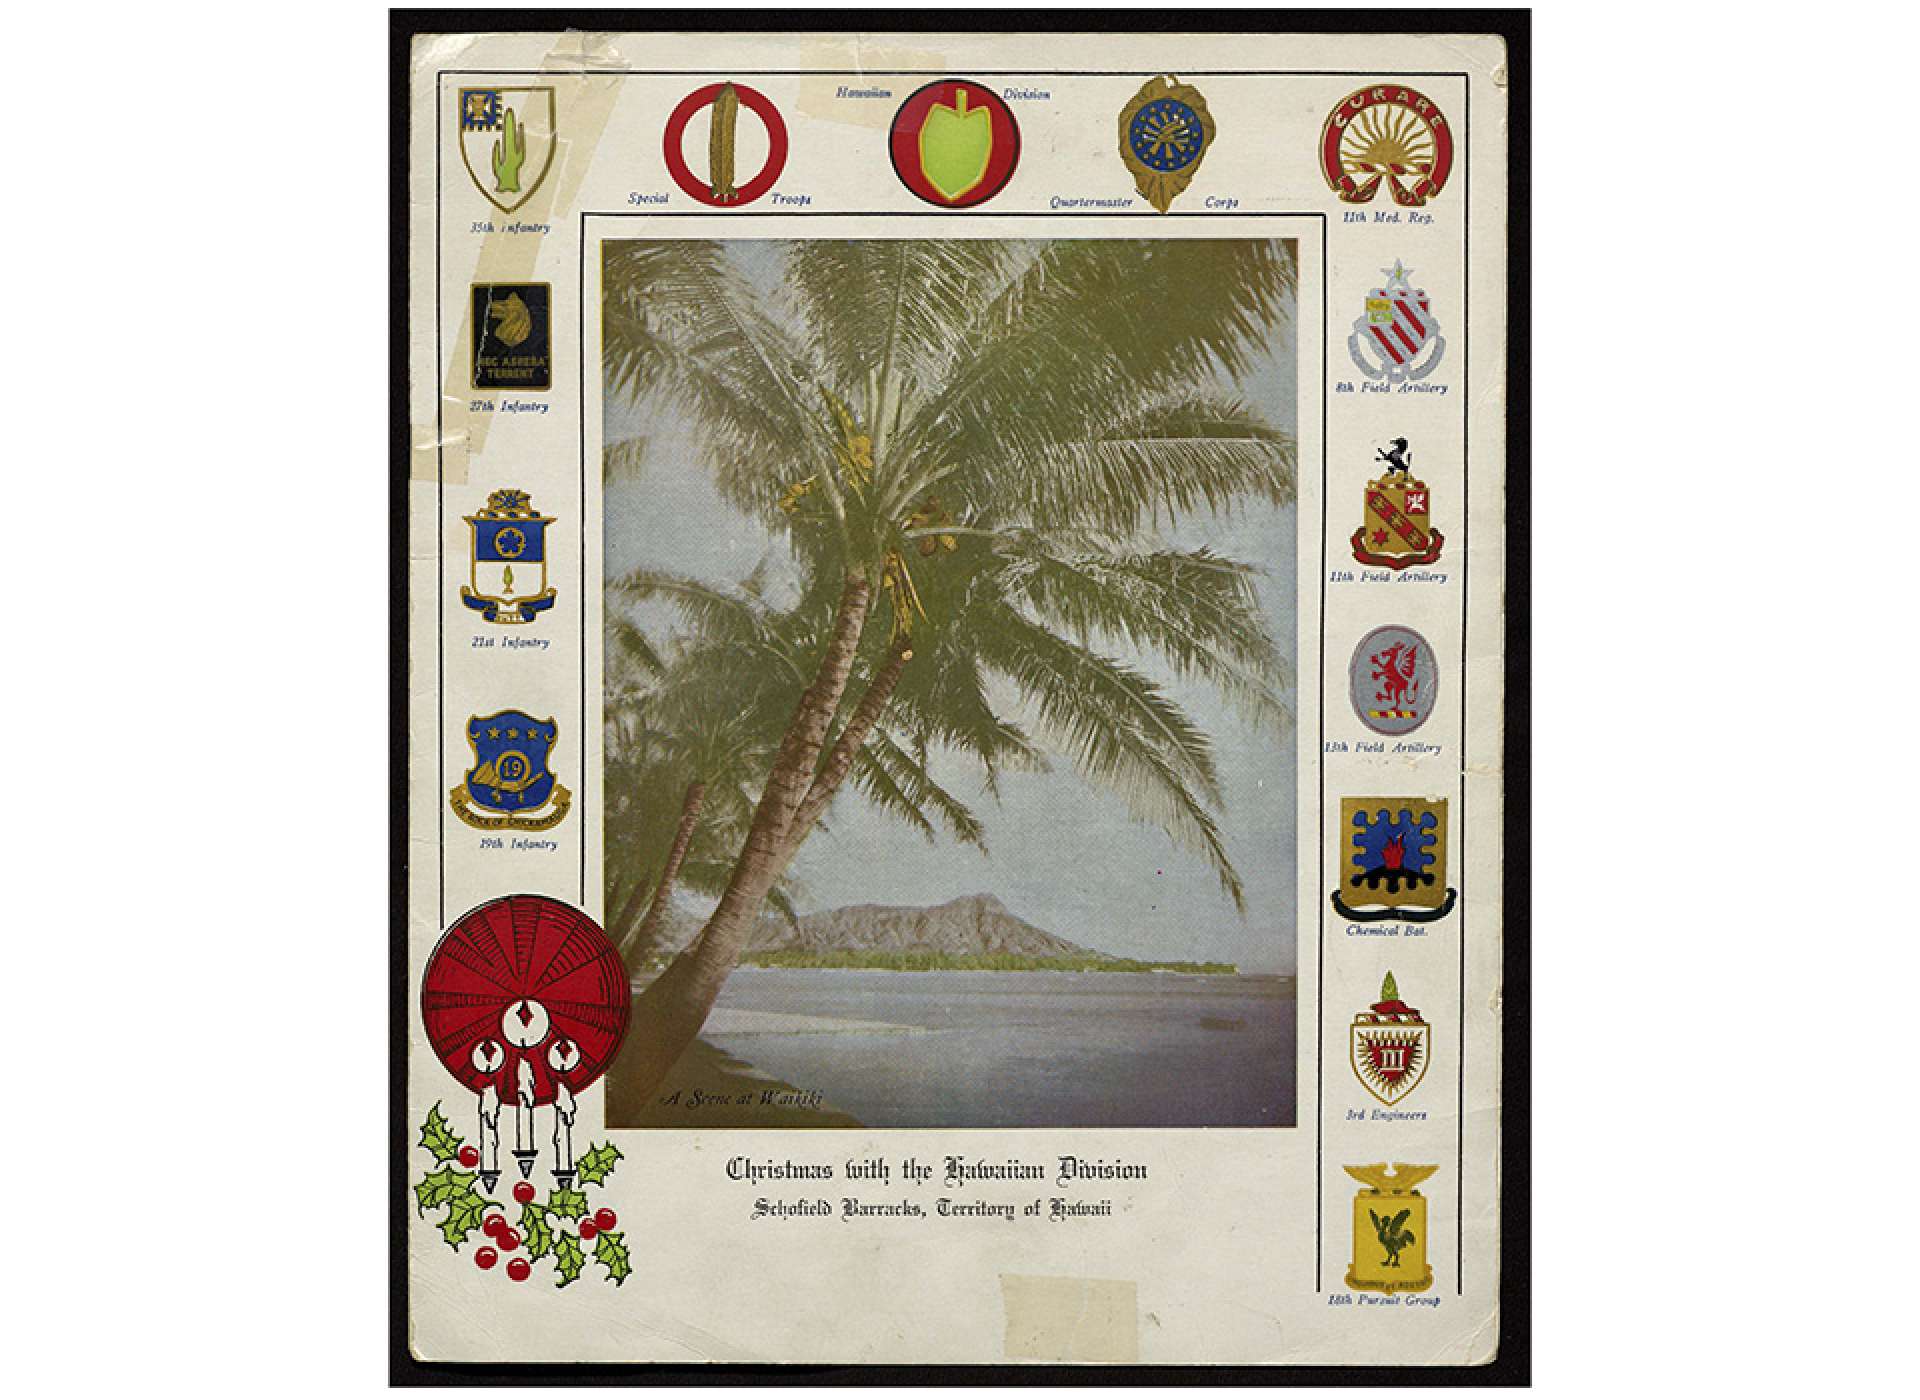 Surrounding an idyllic photo of Diamond Head are crests of the elements of the Hawaii Division